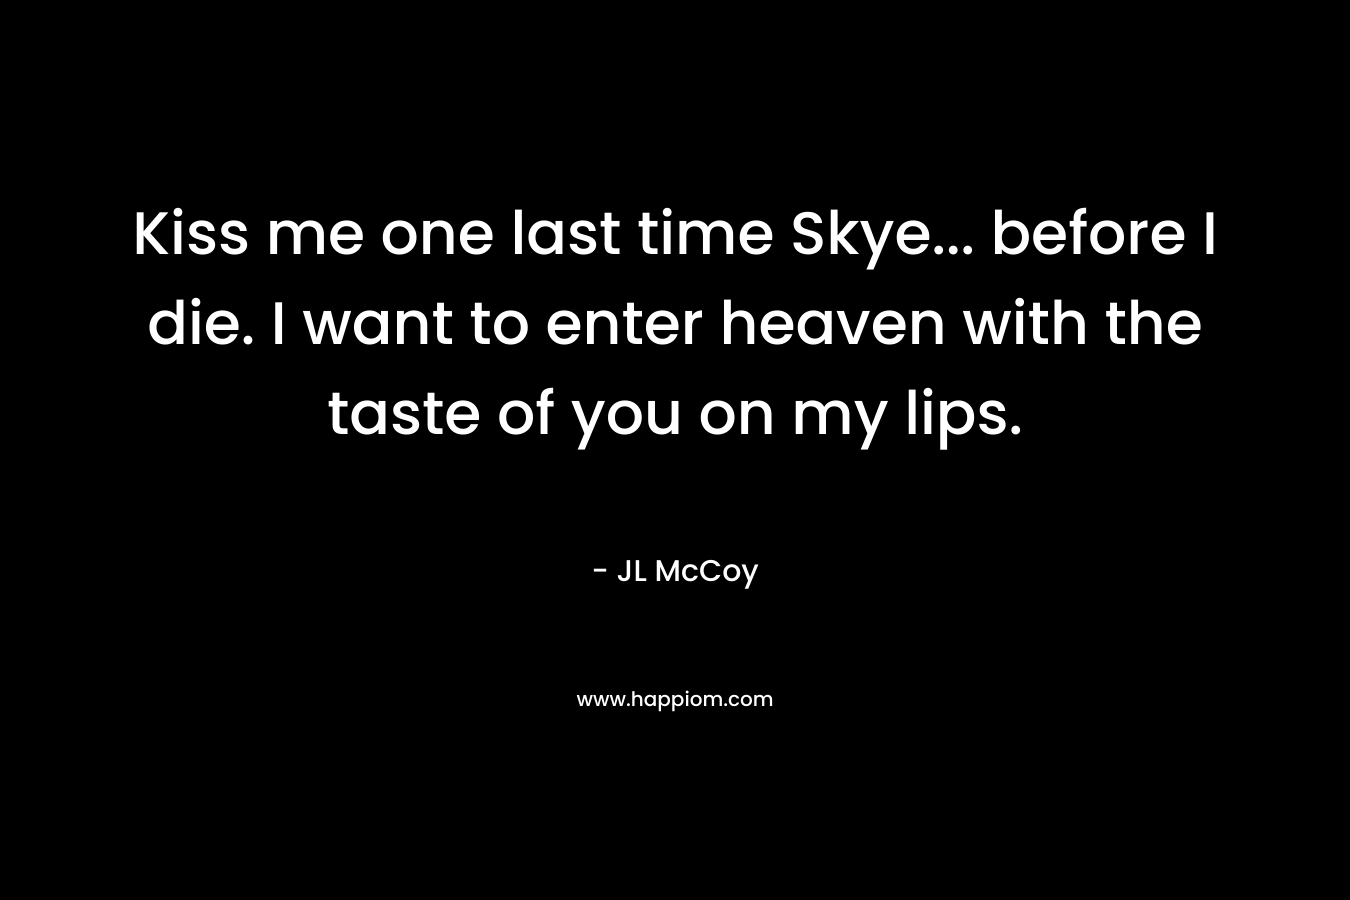 Kiss me one last time Skye... before I die. I want to enter heaven with the taste of you on my lips.